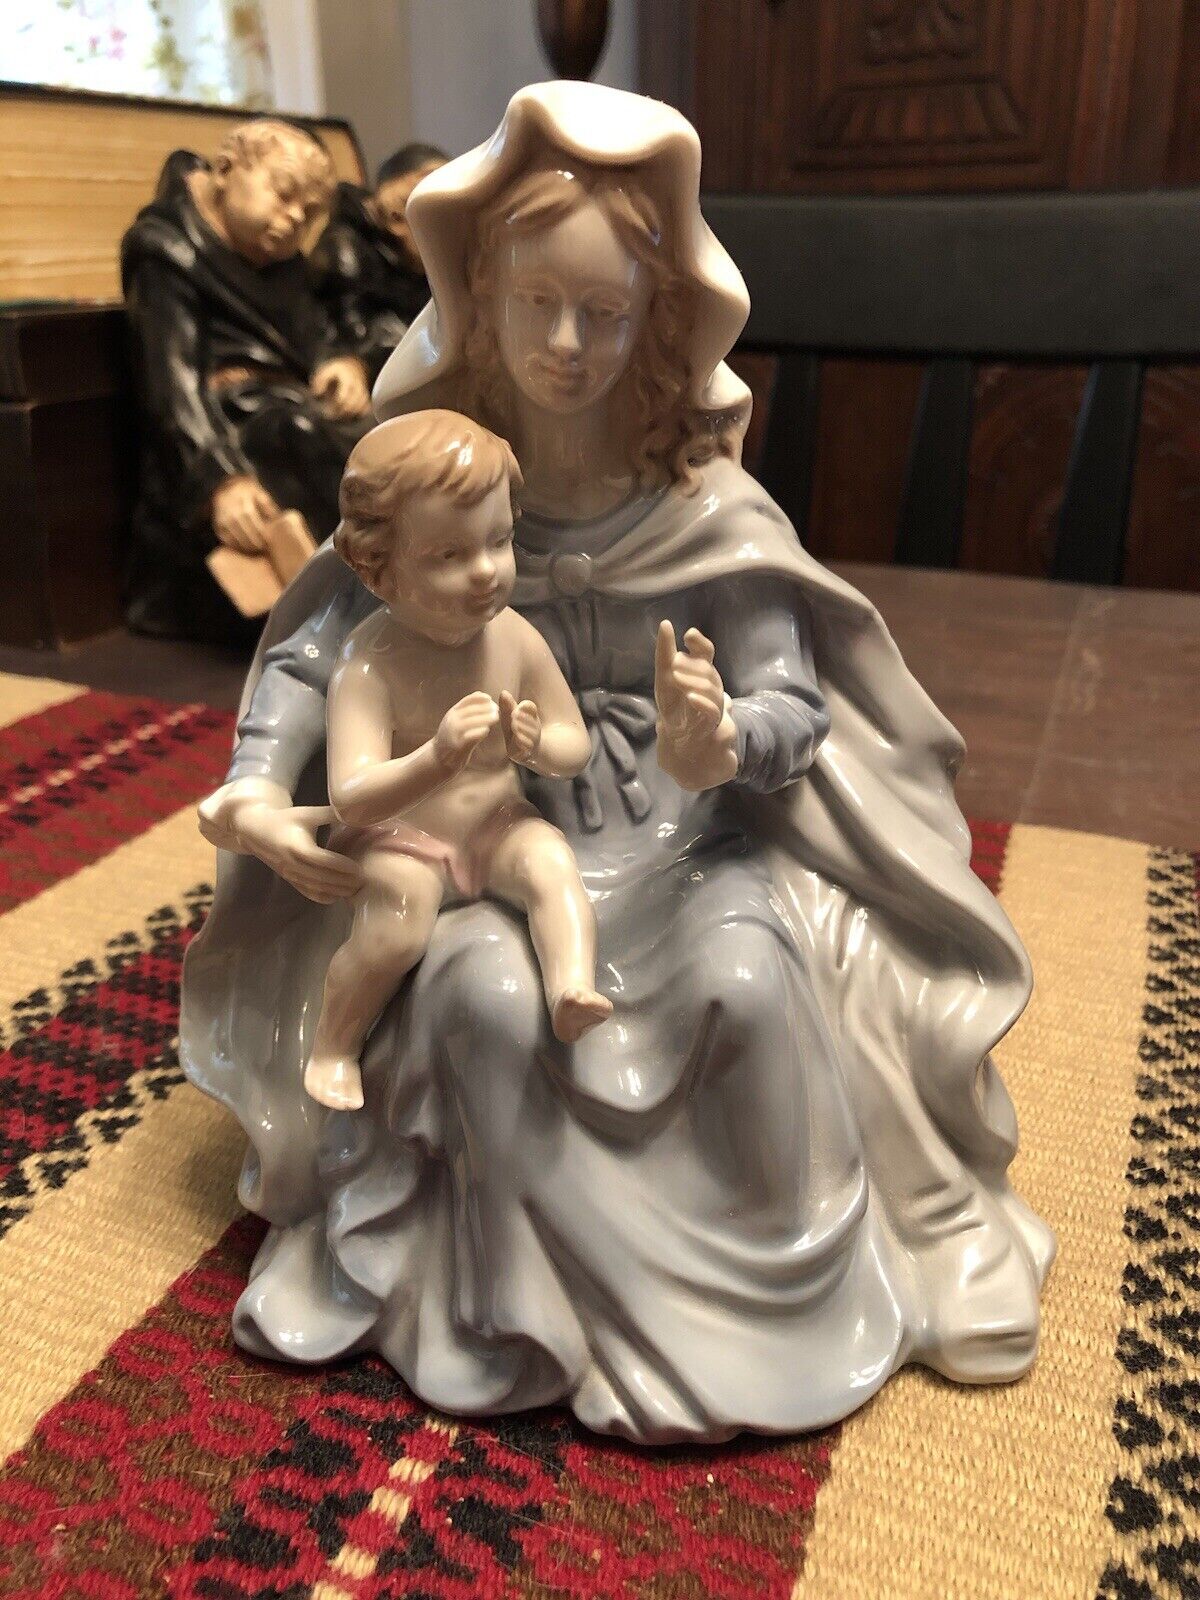 Virgin Mary And Child Jesus Statue, Valencia. FINAL OFFER